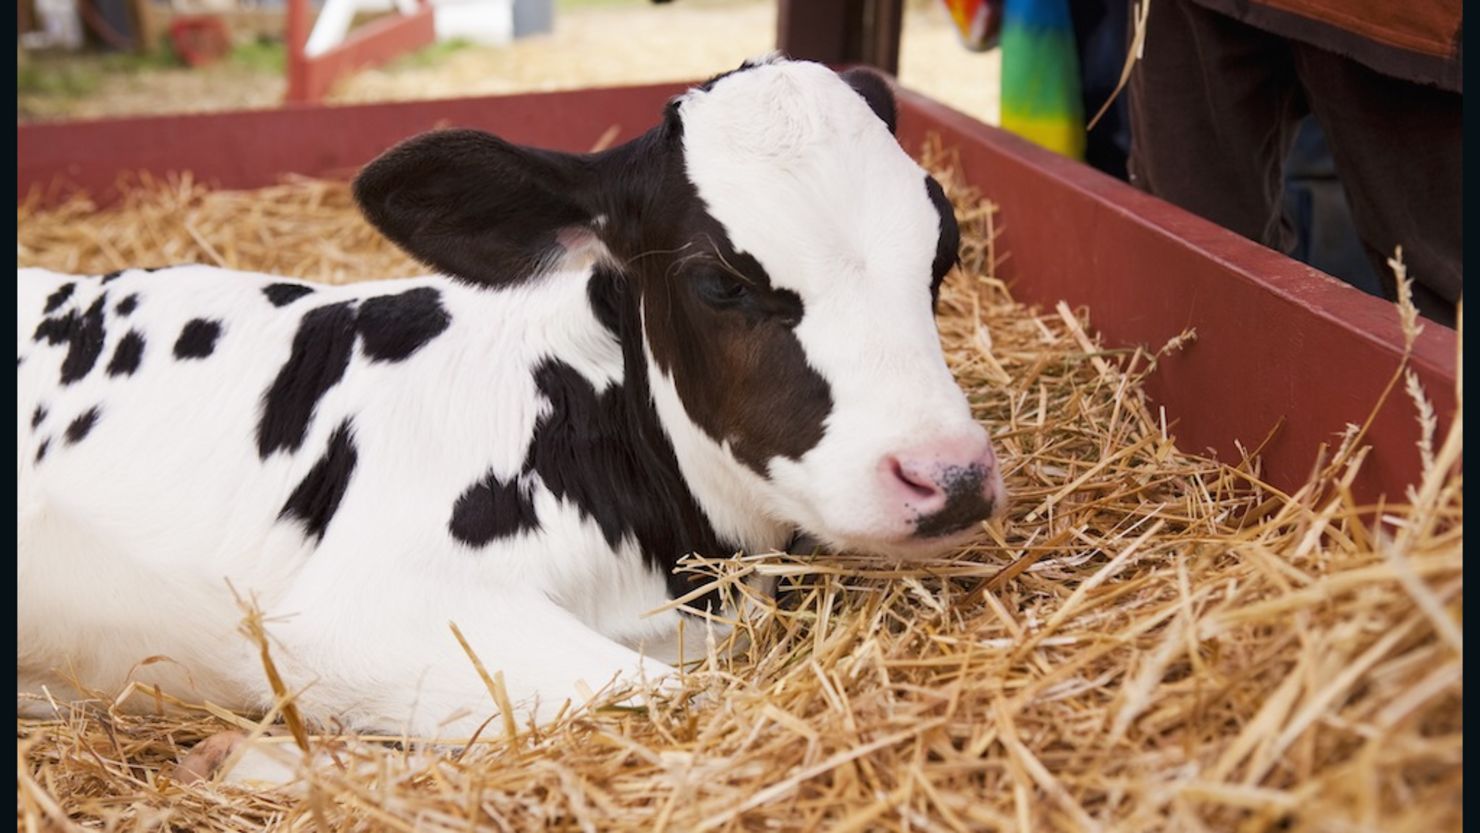 Genetically modified cow may hold answer for milk allergy